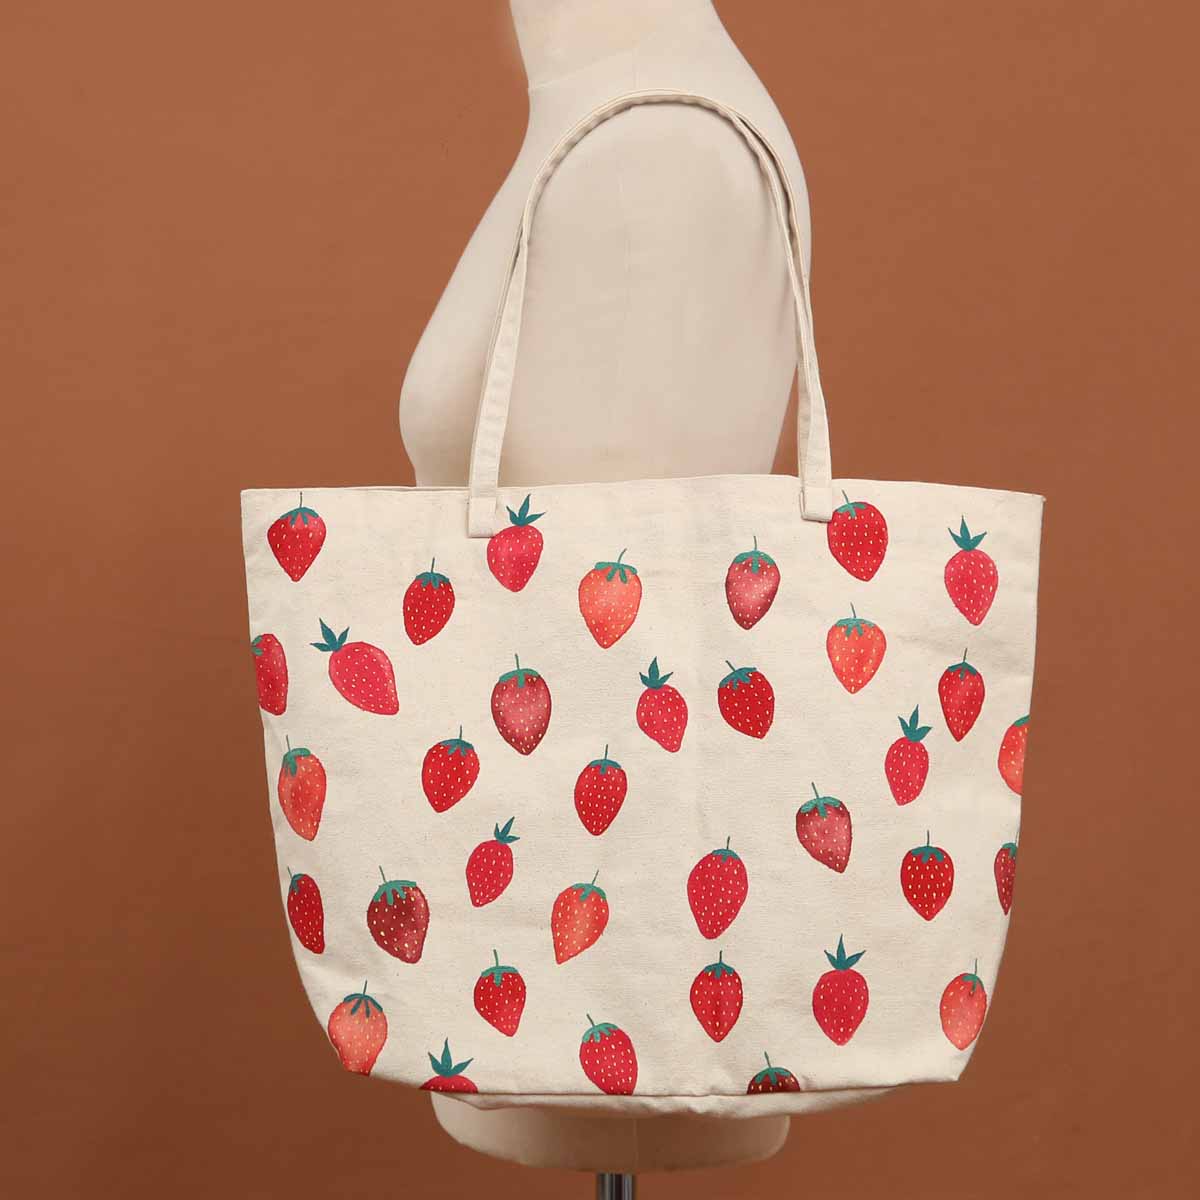 Strawberries and Cream Tote Bag | Who We Are